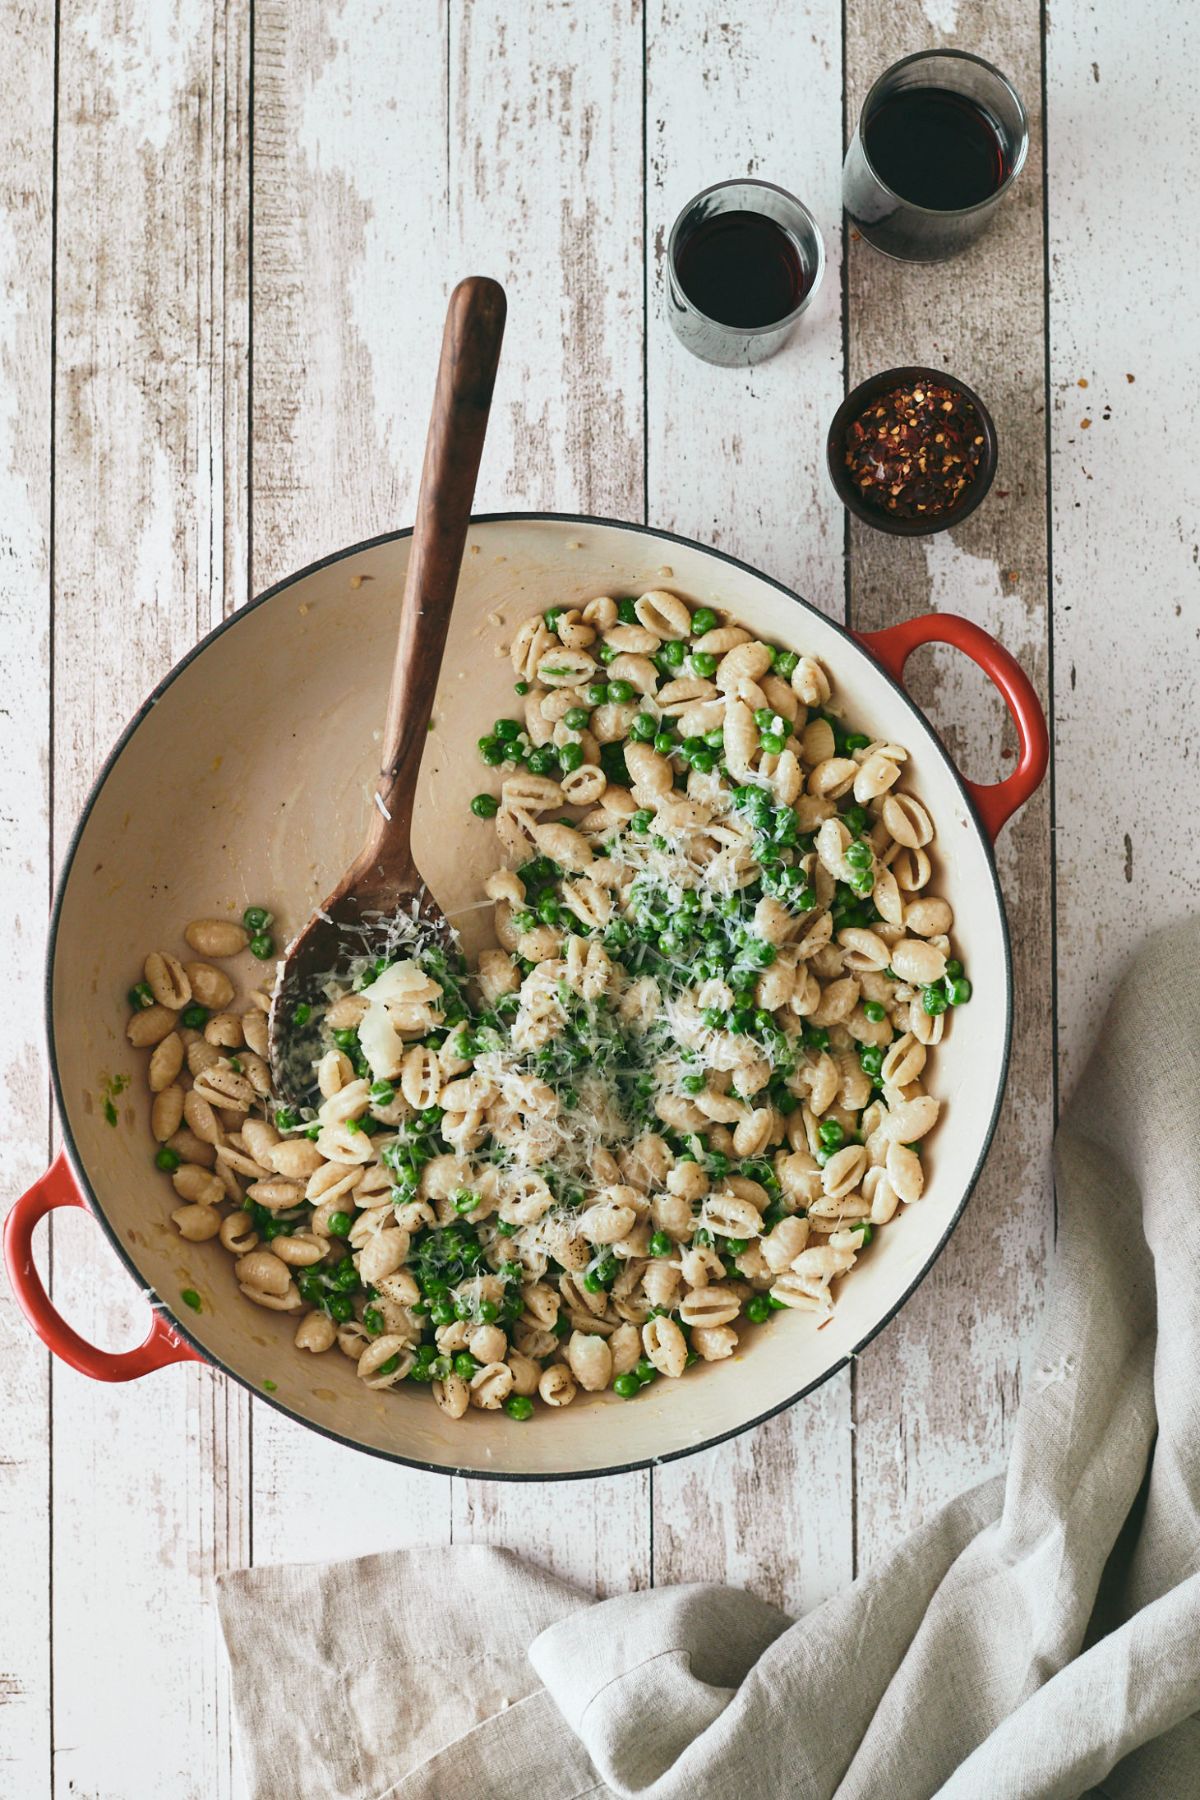 Tasty pea pasta in a bowl with a wooden spoon.